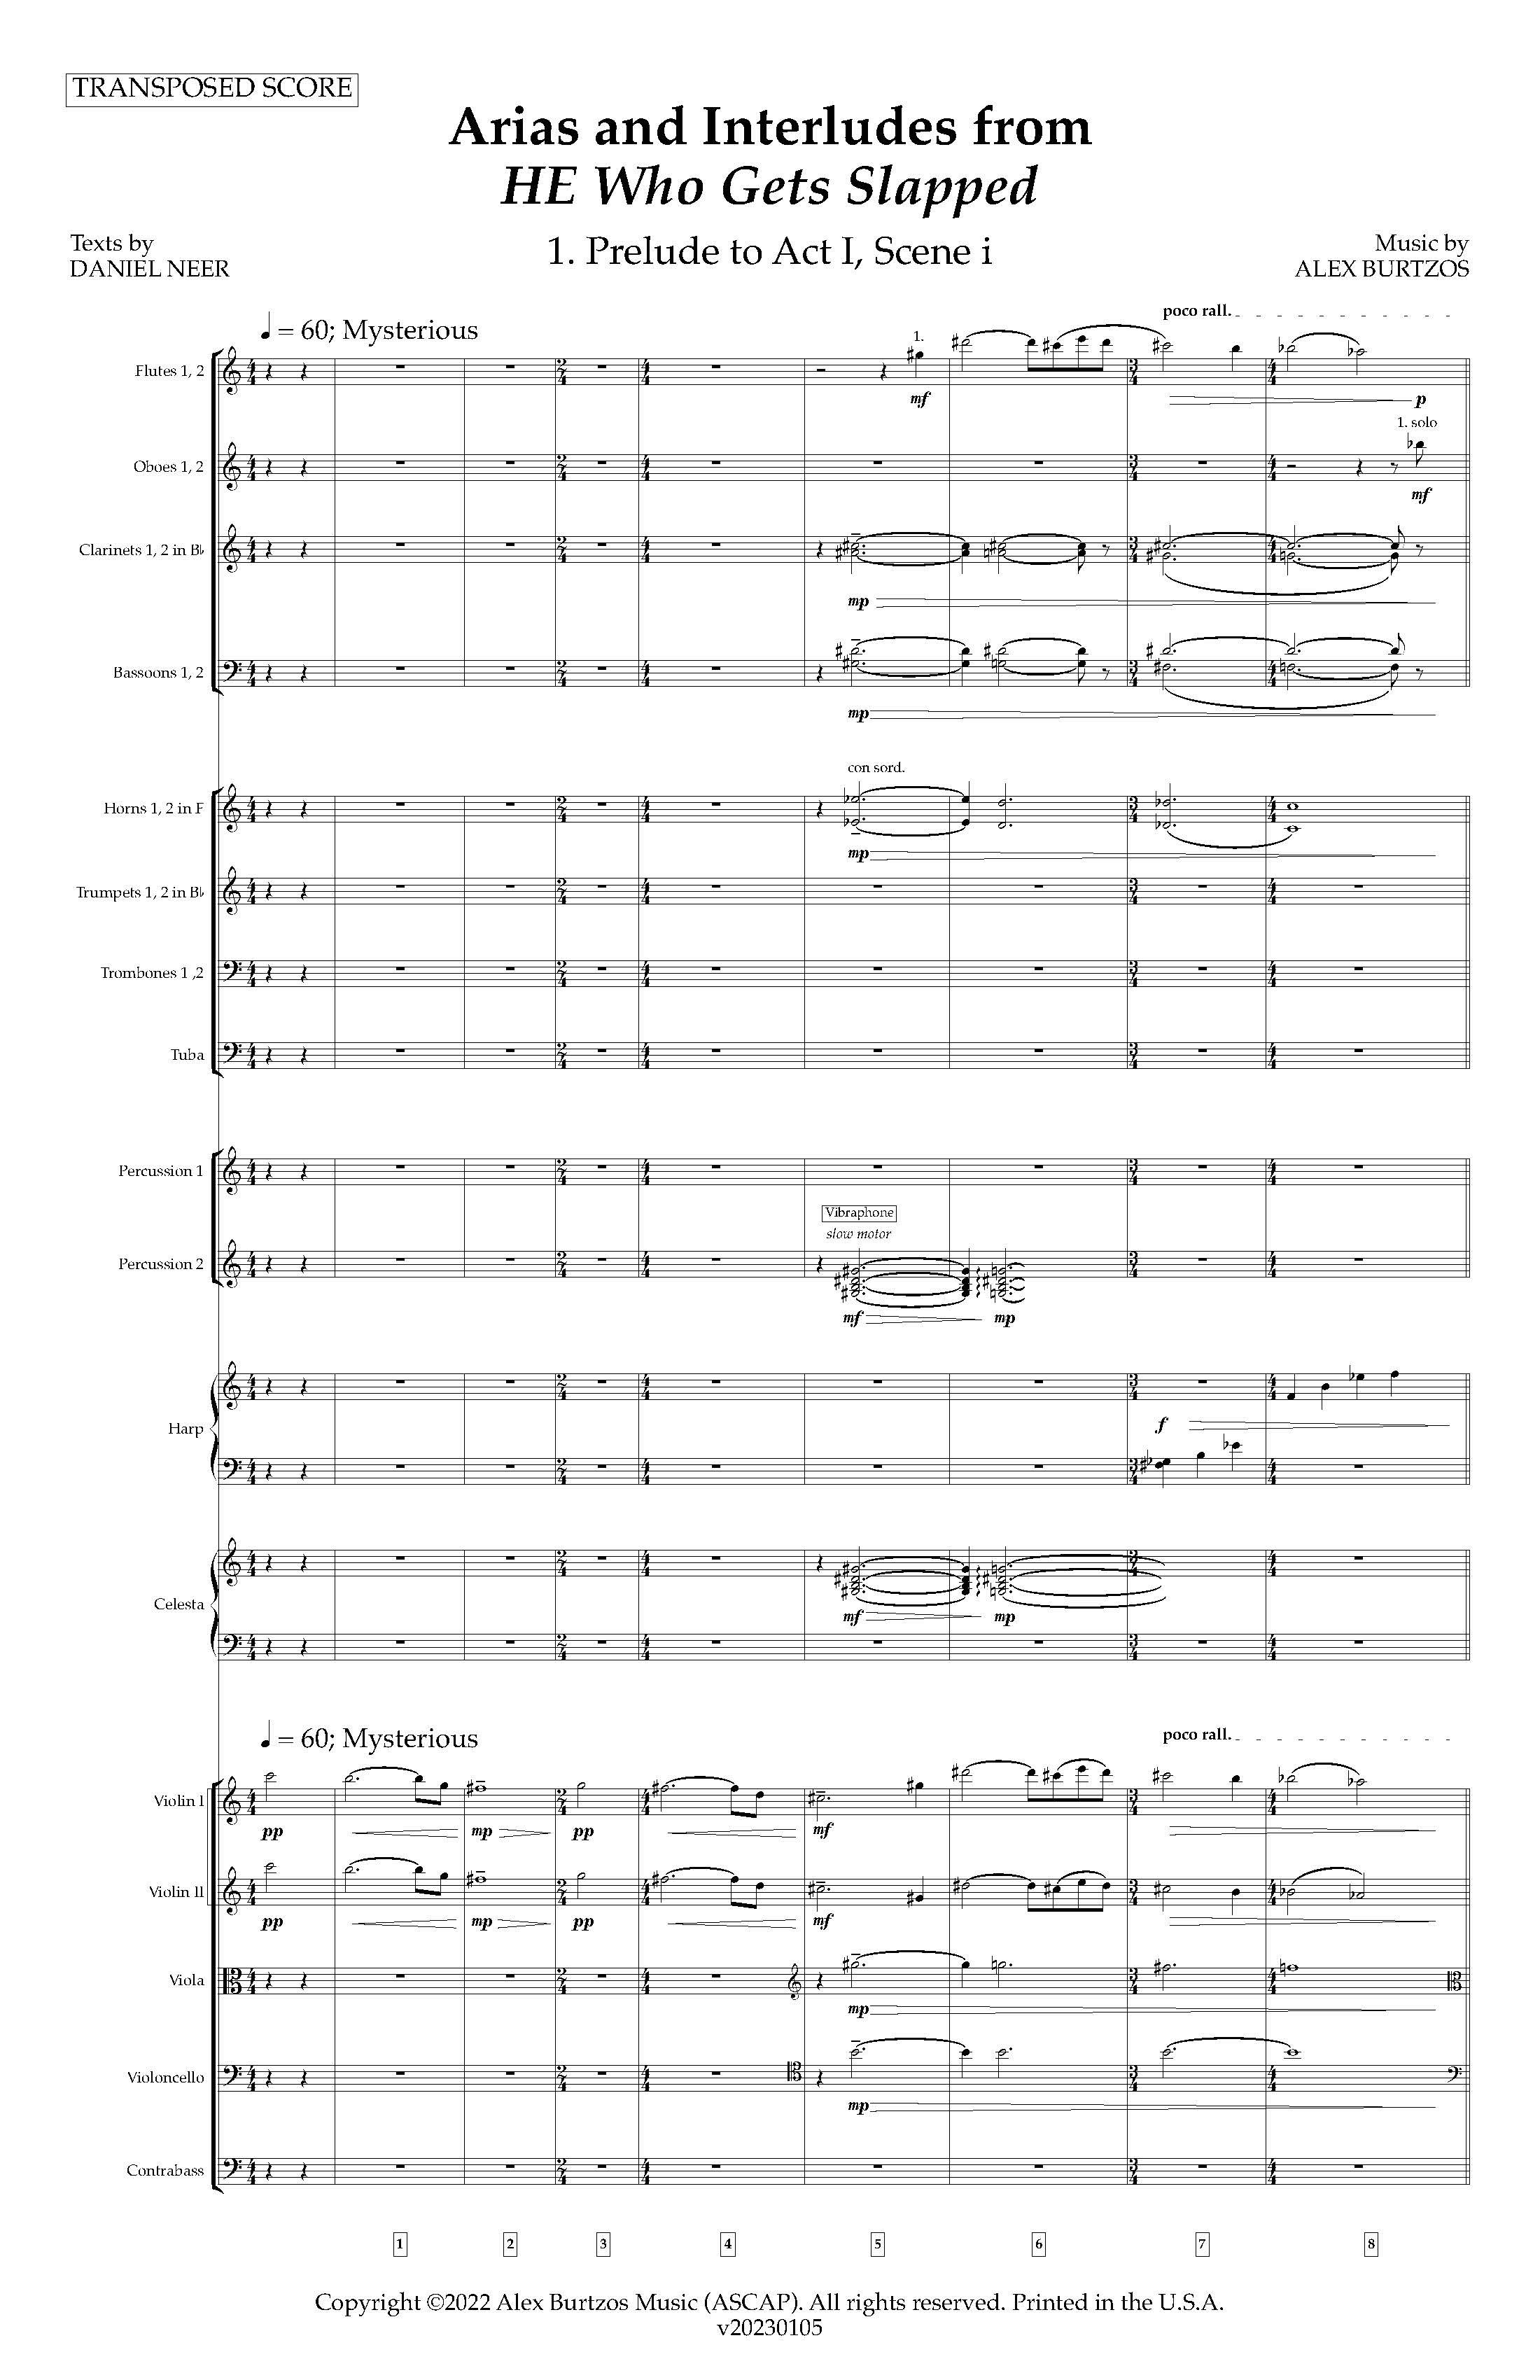 Arias and Interludes from HWGS - Complete Score_Page_07.jpg